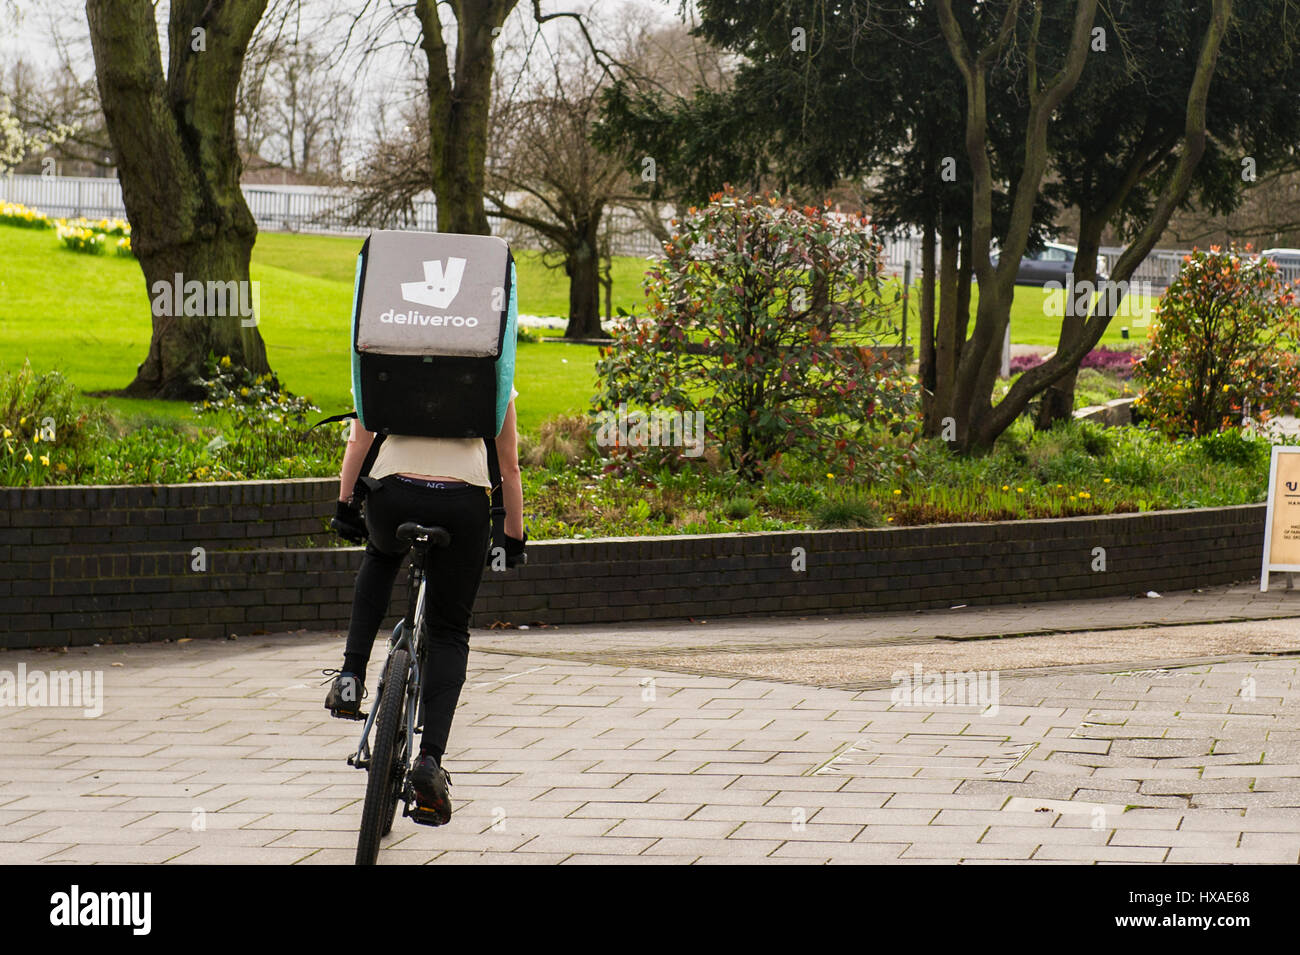 Deliveroo food delivery employee man riding a push bike with a food delivery box on his back. Stock Photo